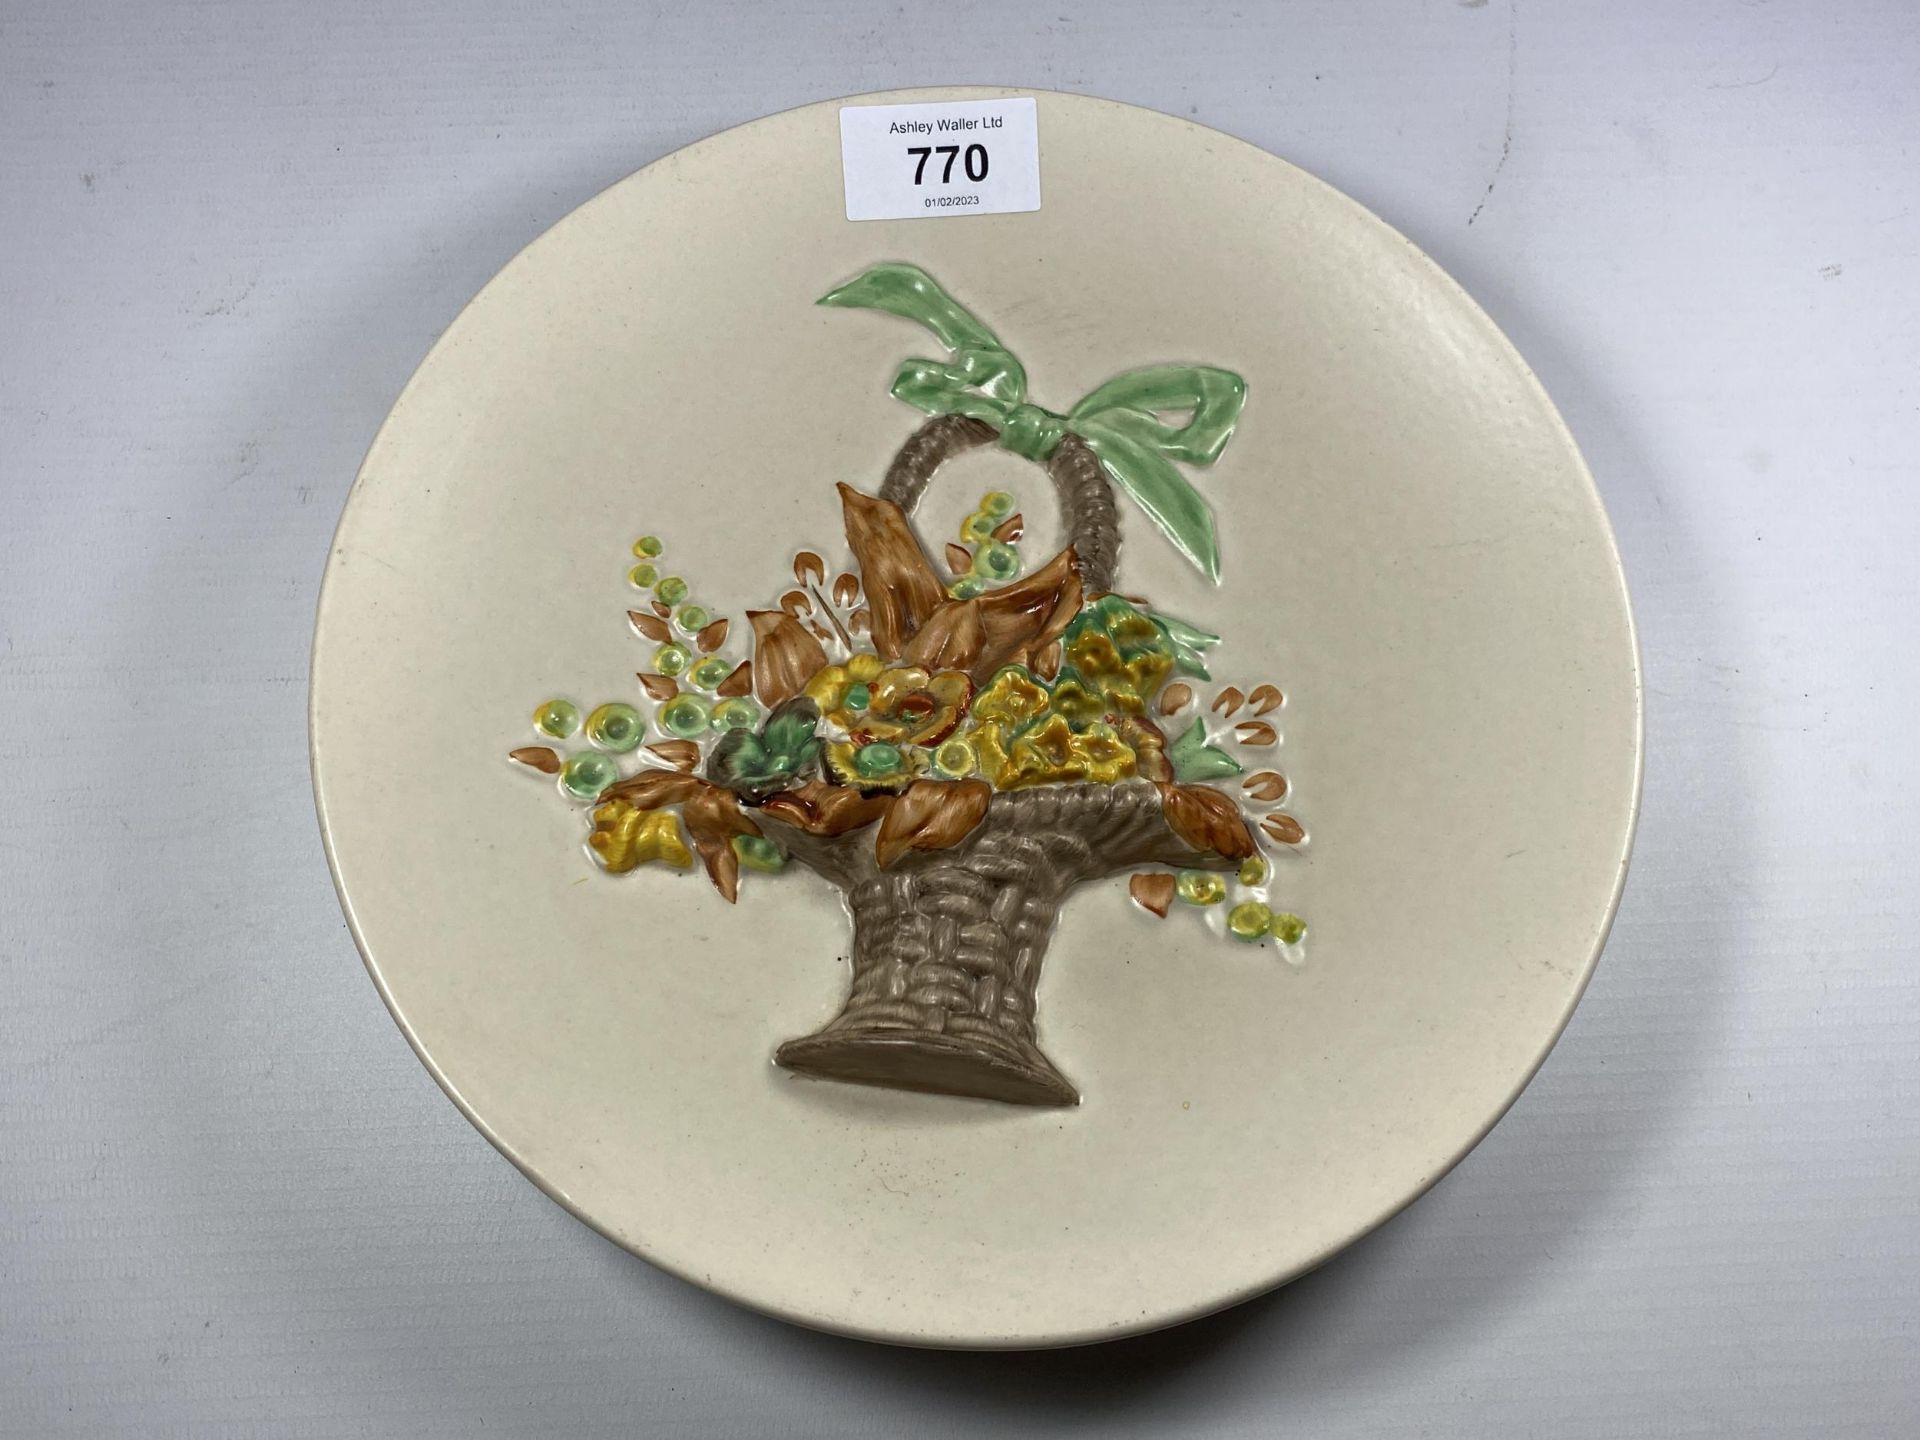 A CLARICE CLIFF POTTERY PLATE WITH BASKET OF FLOWER RELIEF MOULDED DESIGN